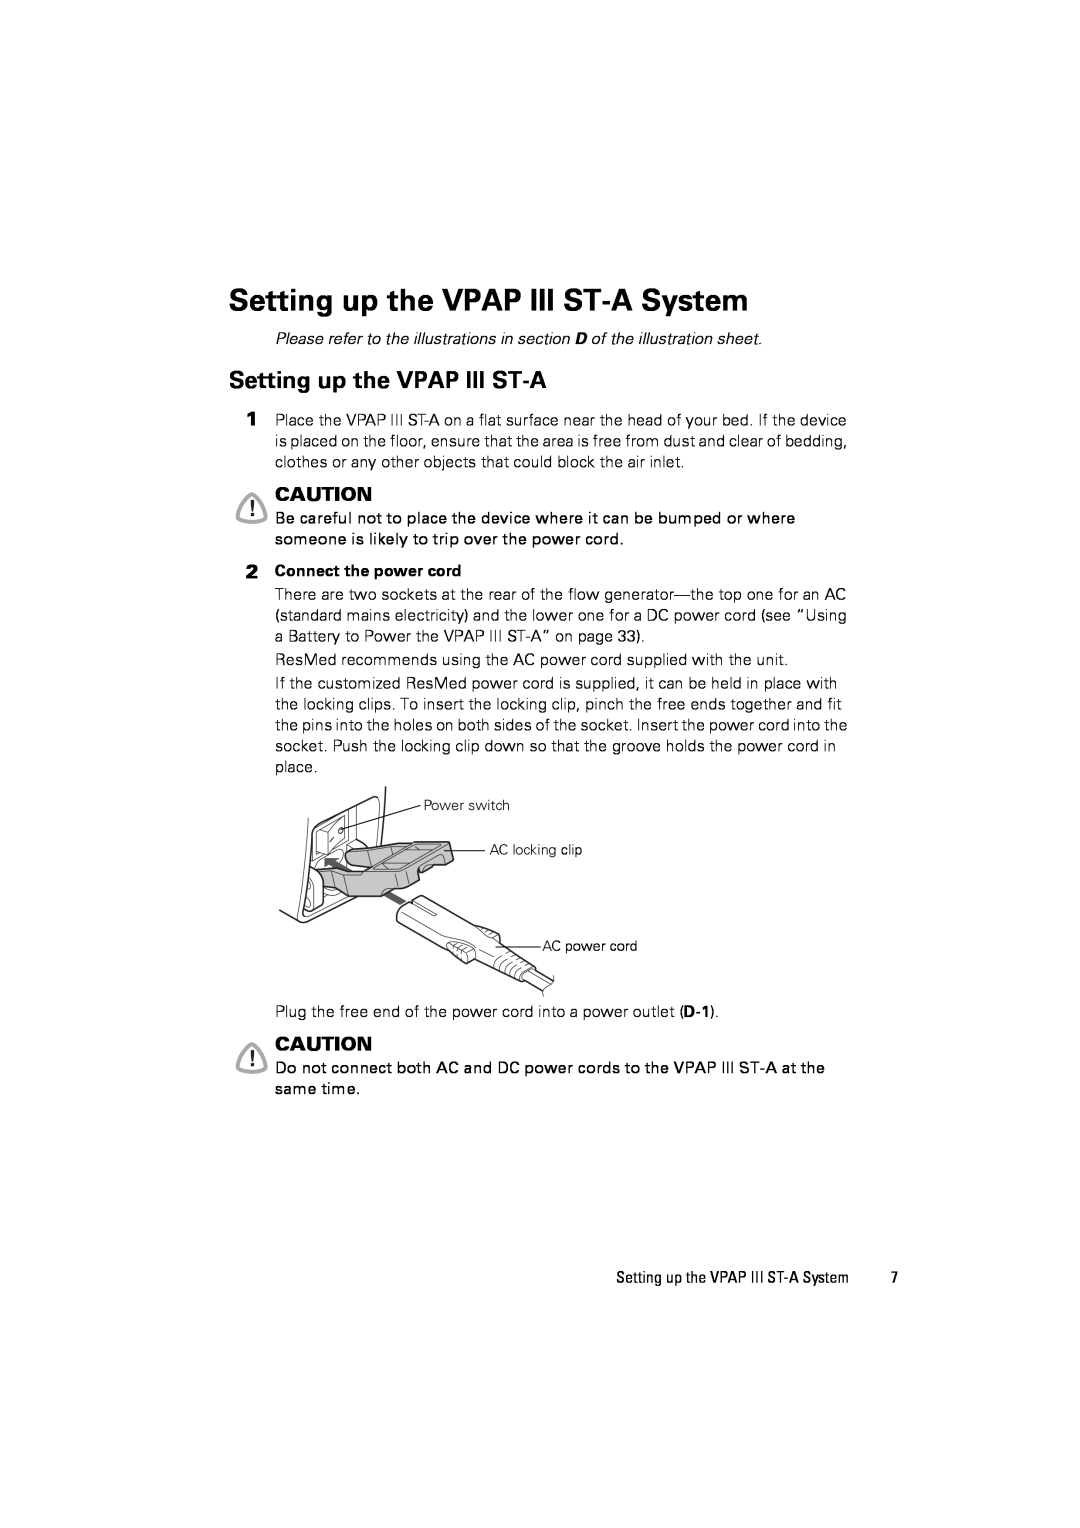 ResMed user manual Setting up the VPAP III ST-ASystem, Connect the power cord 